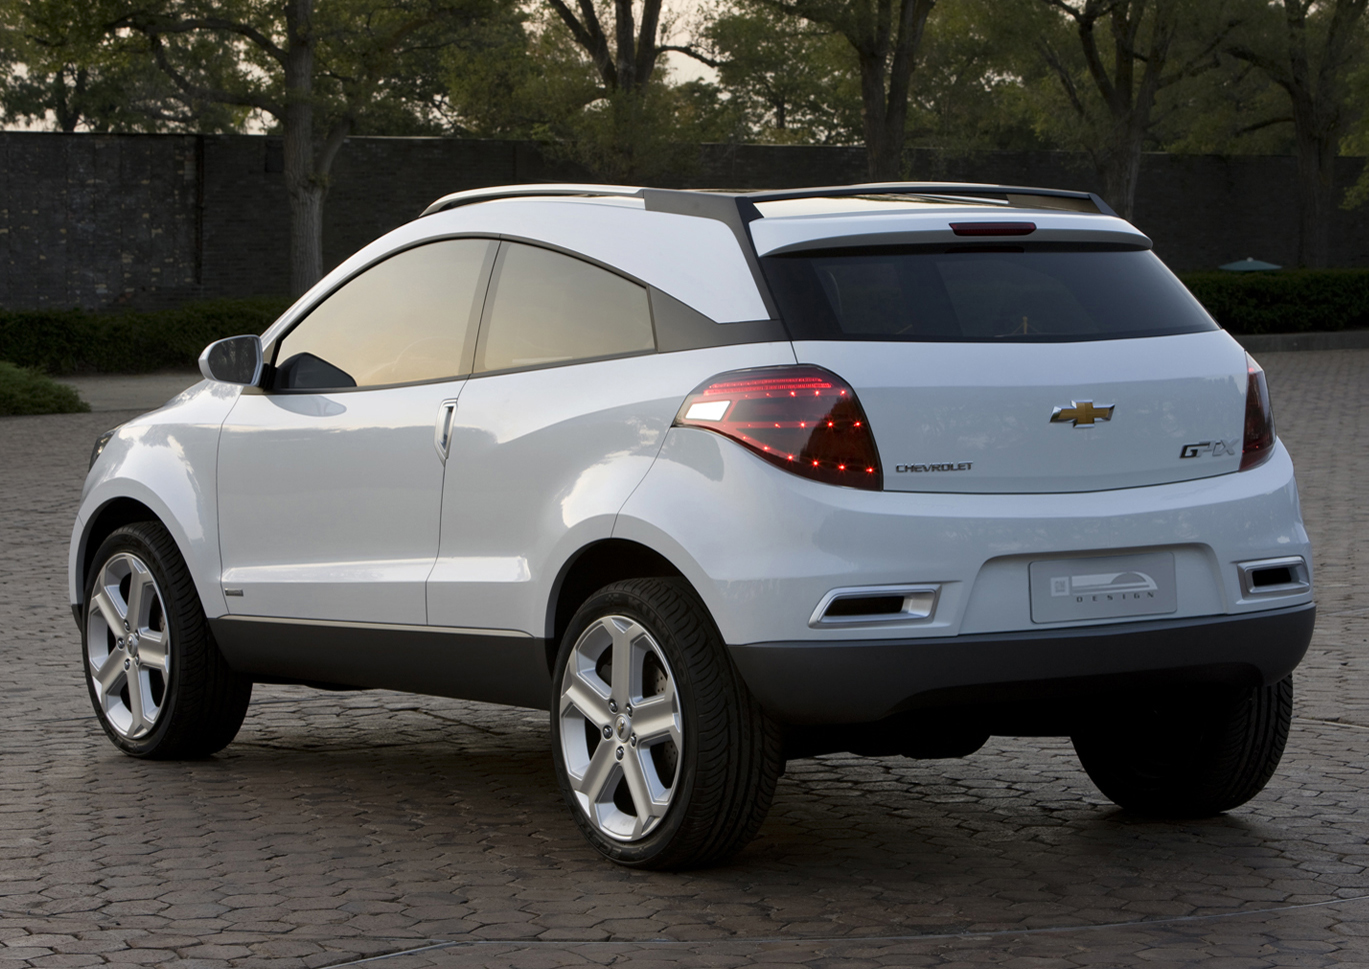 Chevrolet GPiX Crossover Coupe Concept